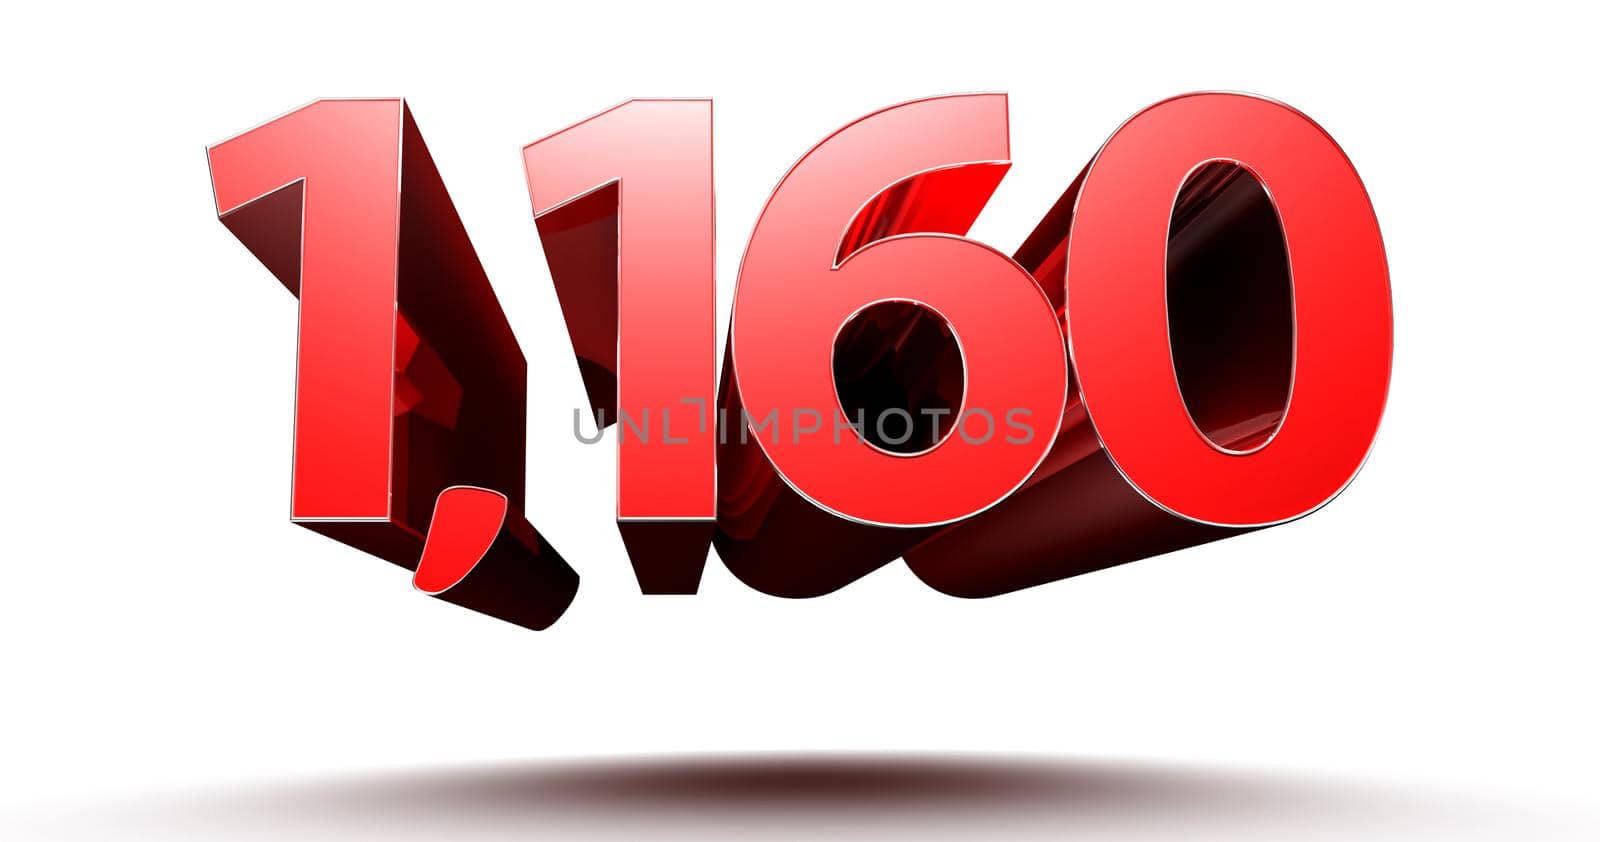 3D illustration Red number 1160 isolated on white background with clipping path.